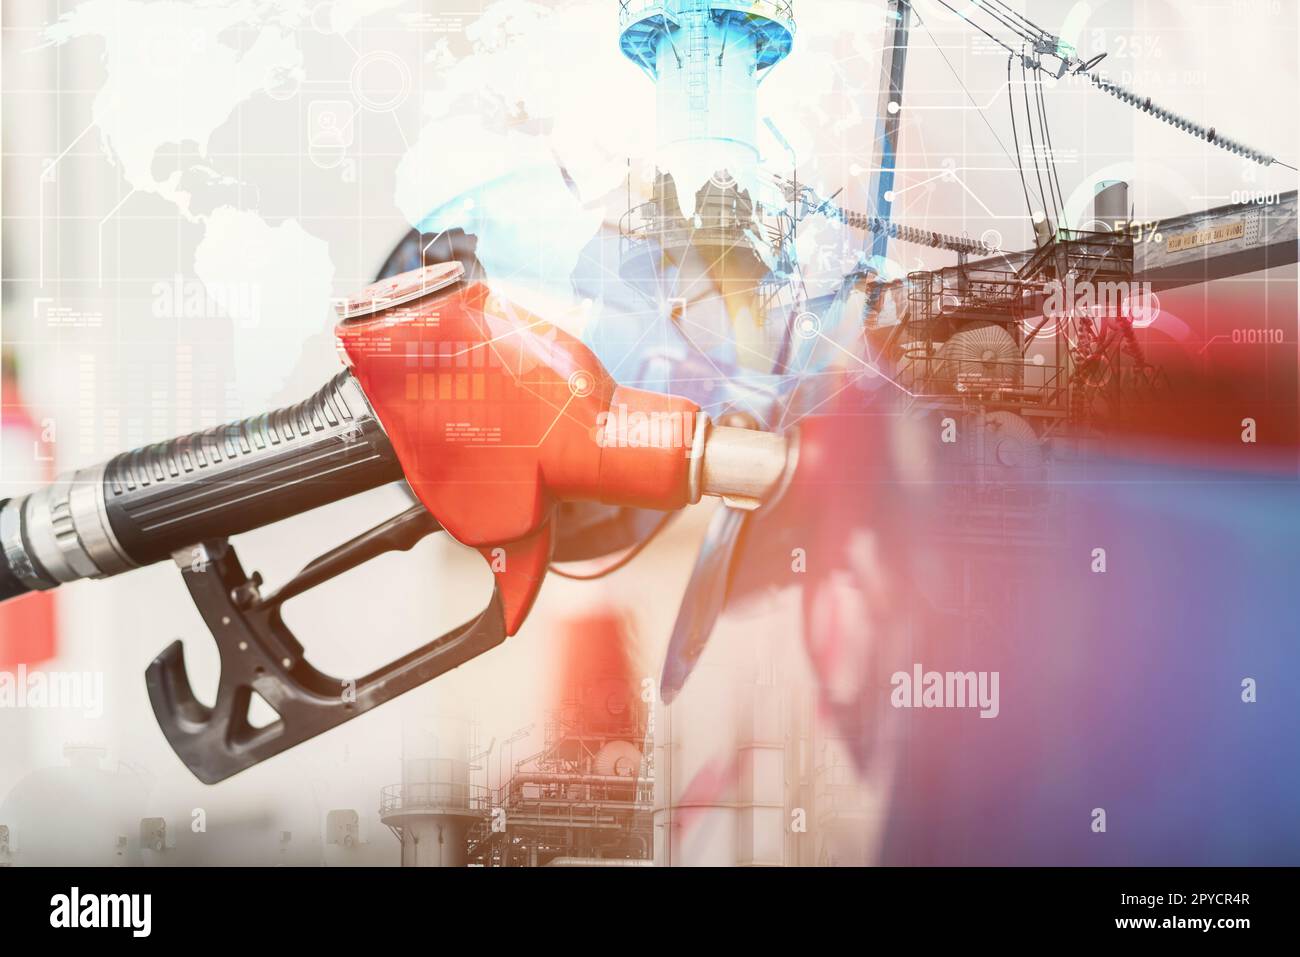 Car fueling at gas station. Refuel fill up with petrol gasoline. Blur petroleum refinery plant and world map background. Petrol industry. Petrol price and oil crisis concept. World oil market concept Stock Photo